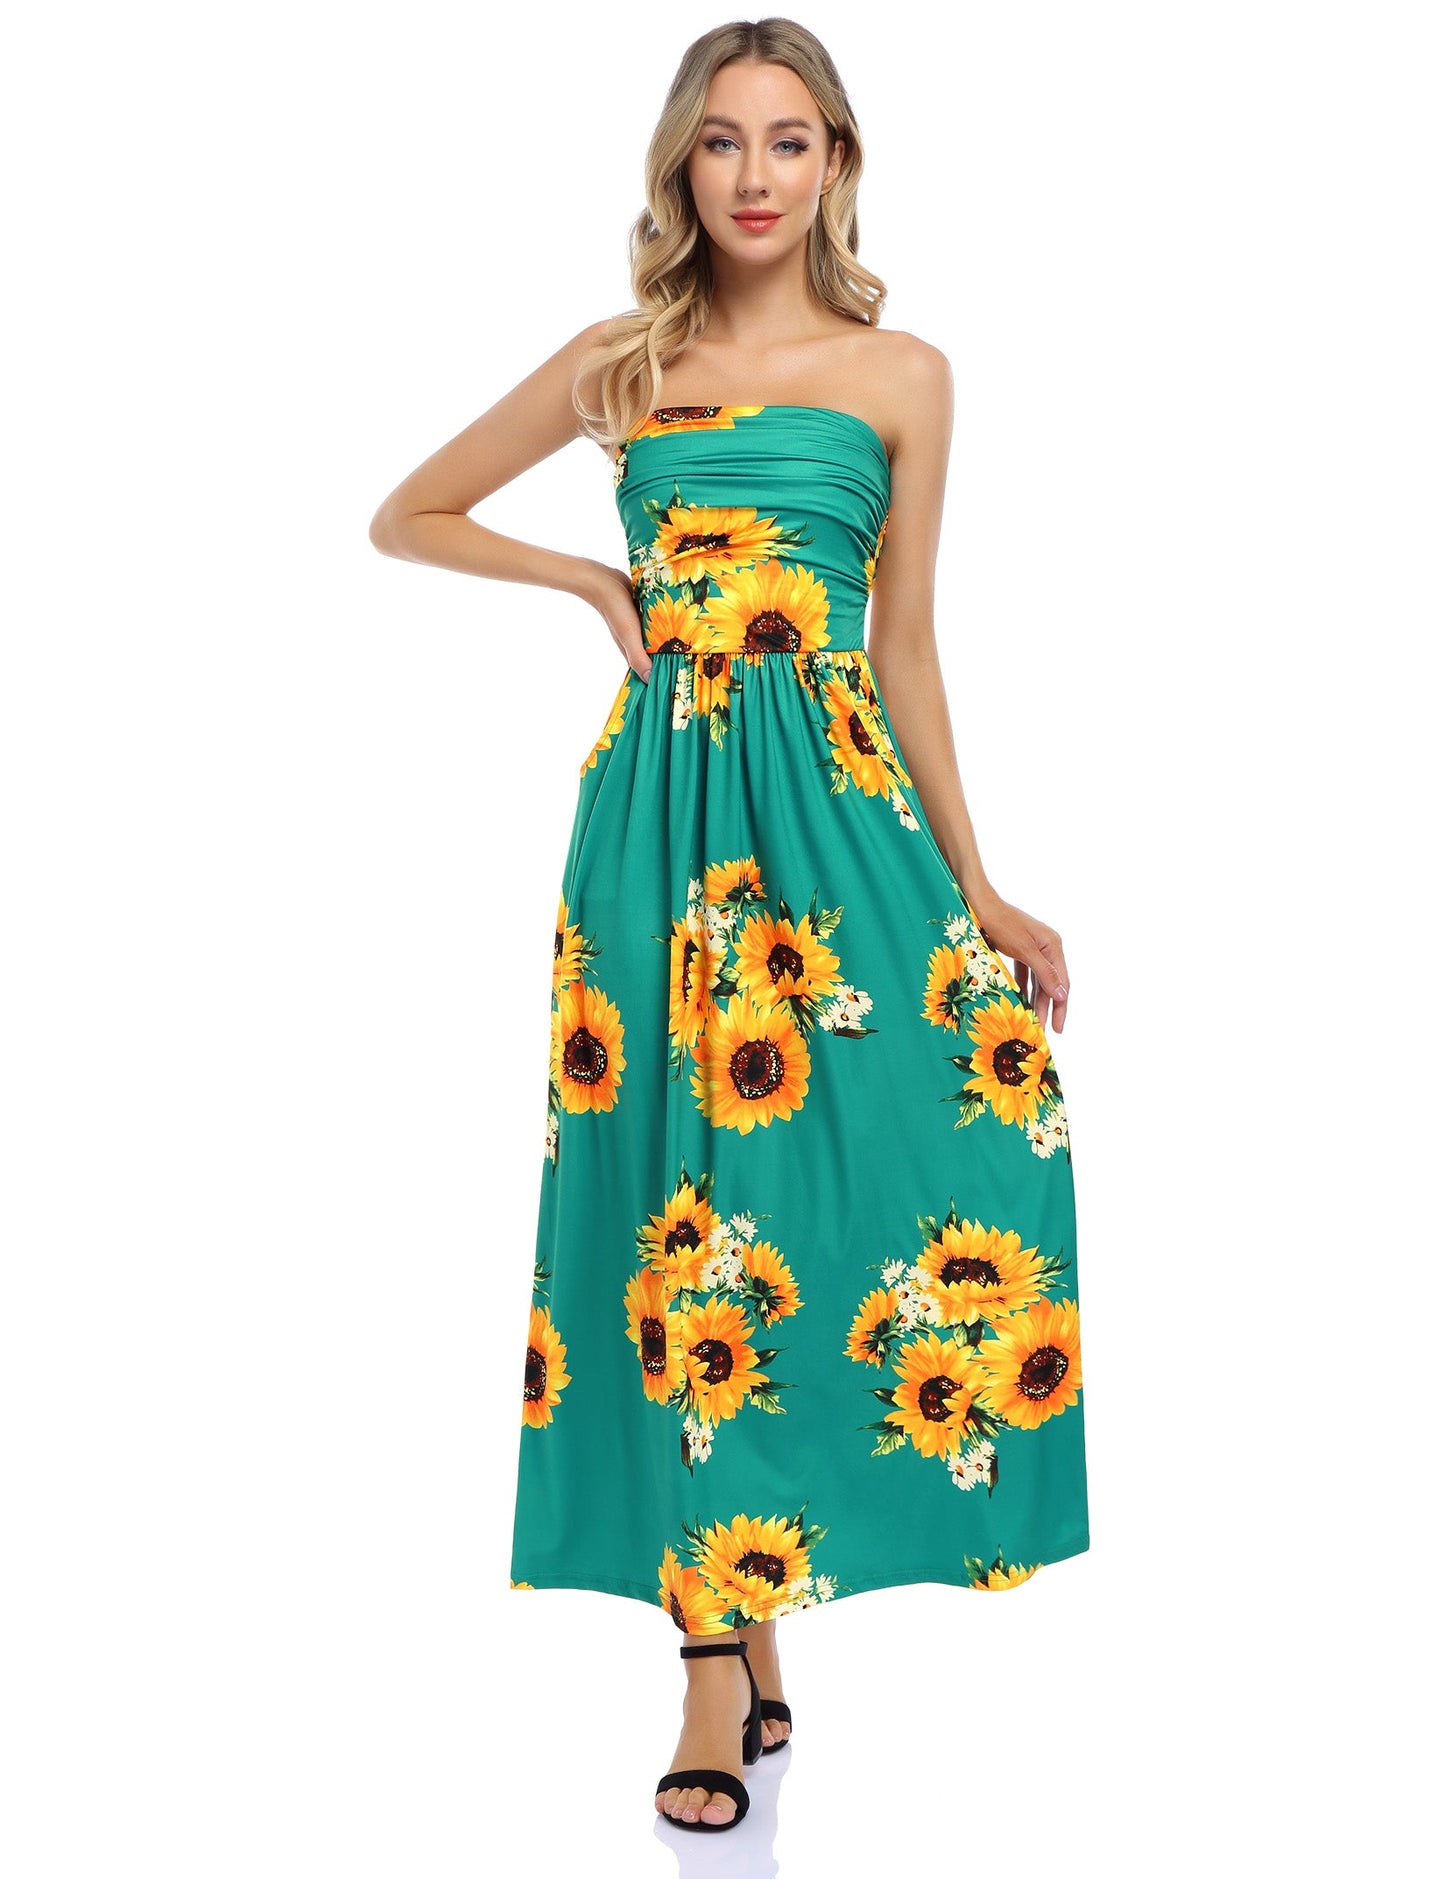 YESFASHION Women's Strapless Graceful Floral Party Maxi Long Dress Green